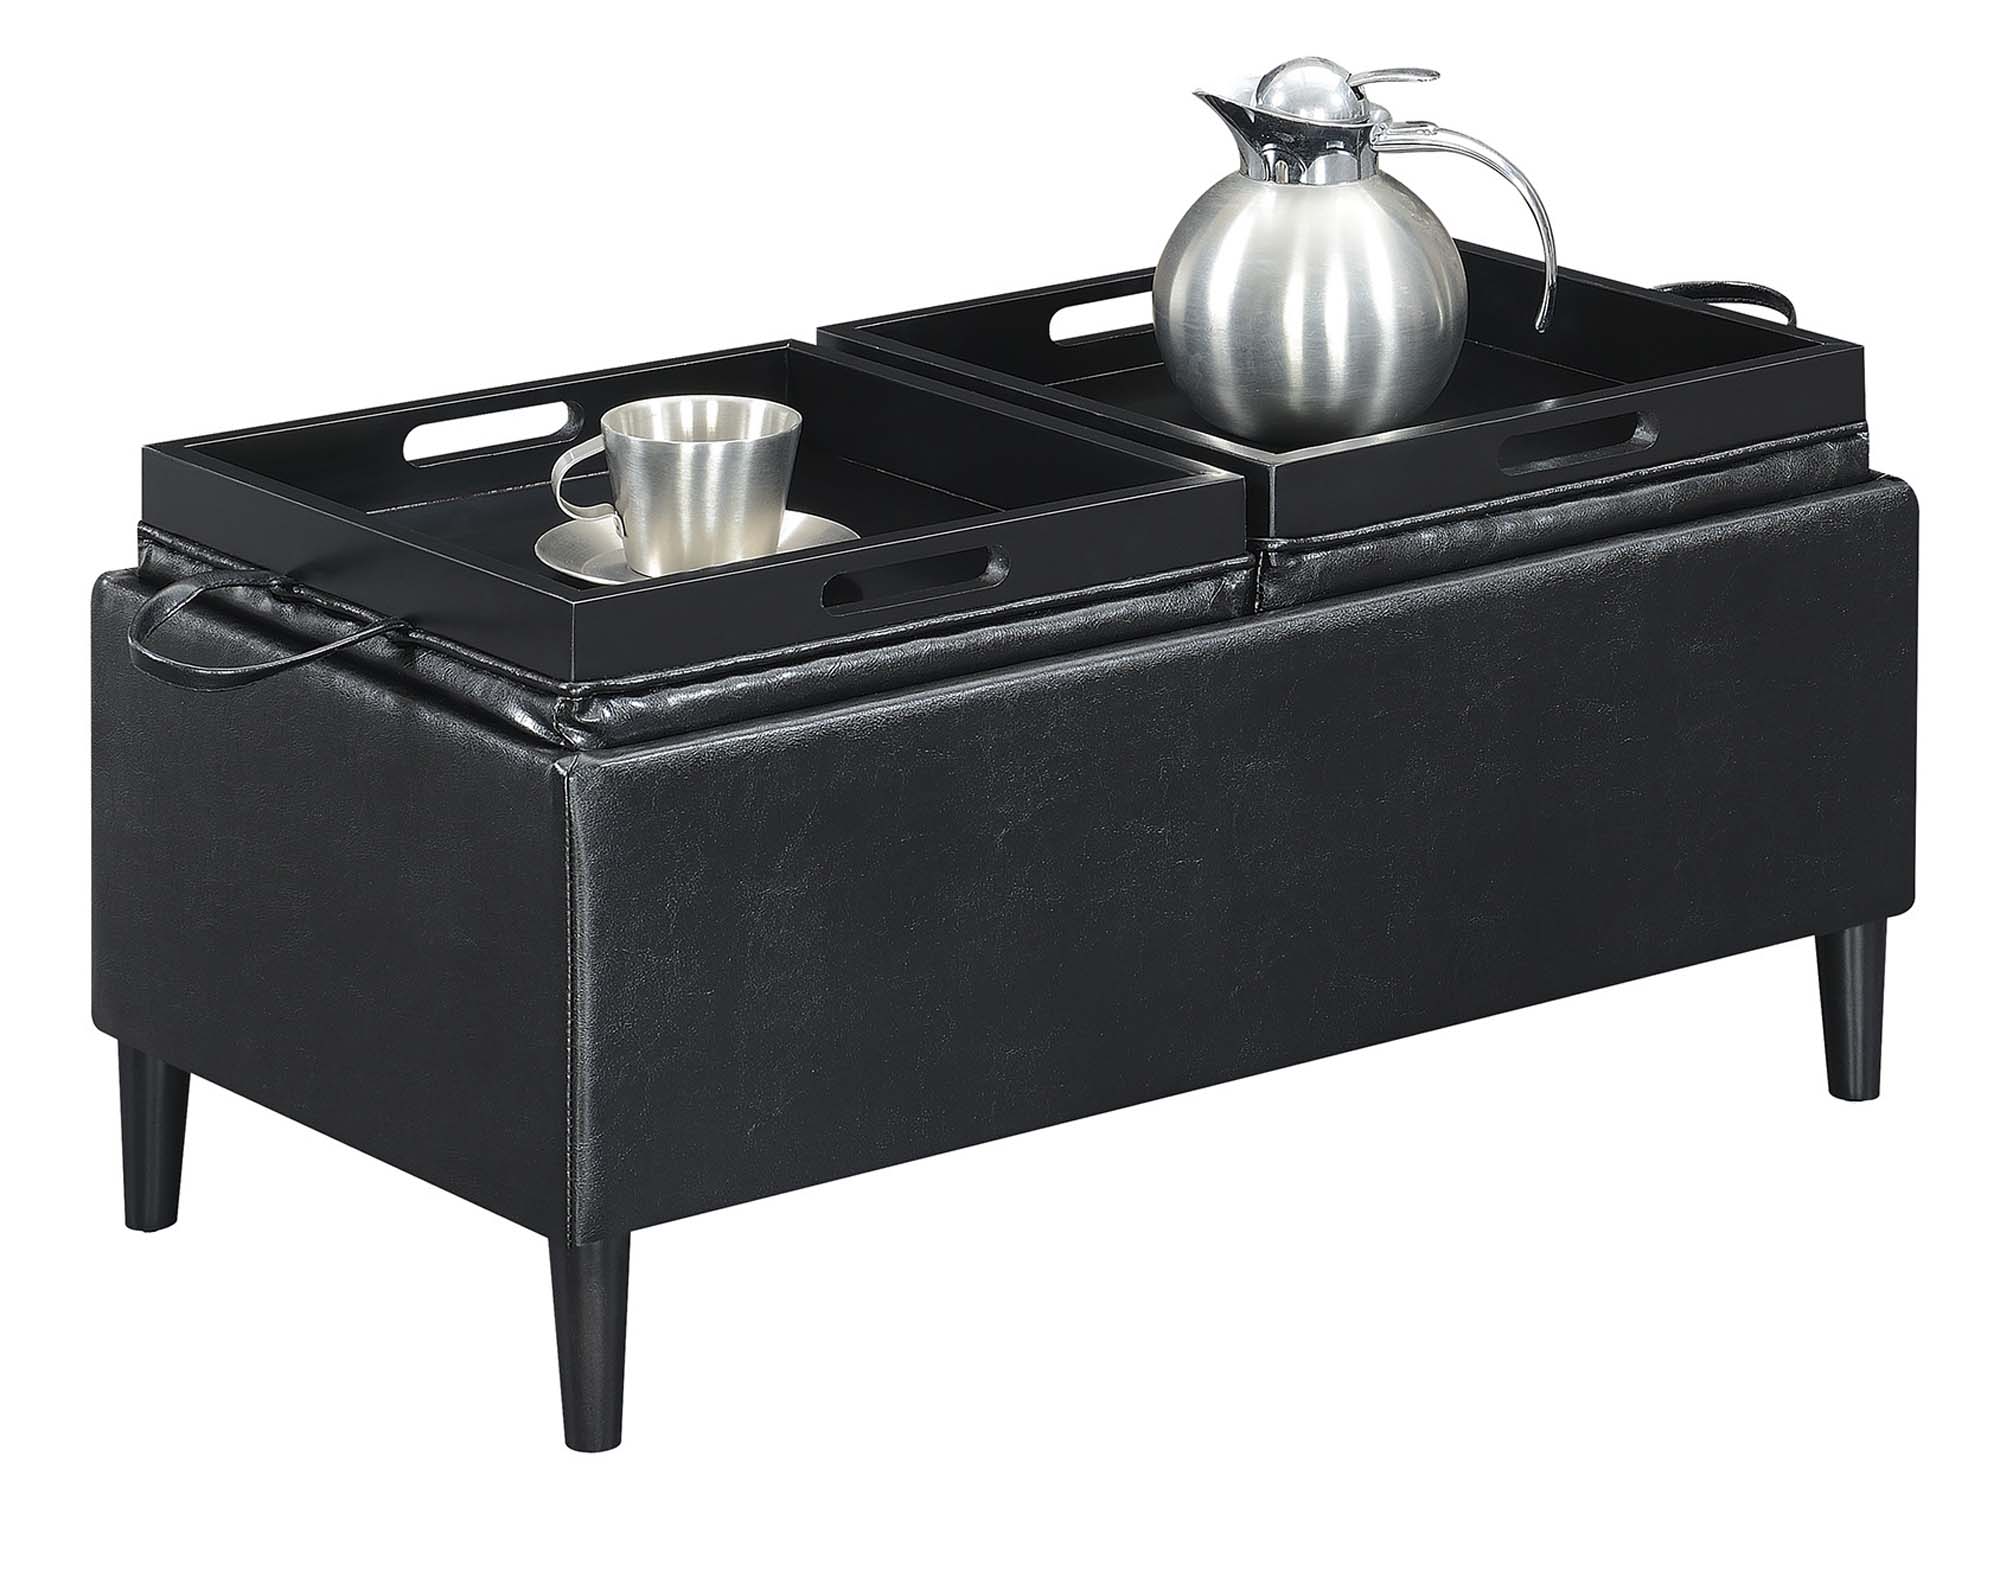 Convenience Concepts Designs4Comfort Magnolia Storage Ottoman with Reversible Trays, Black Faux Leather - image 2 of 4